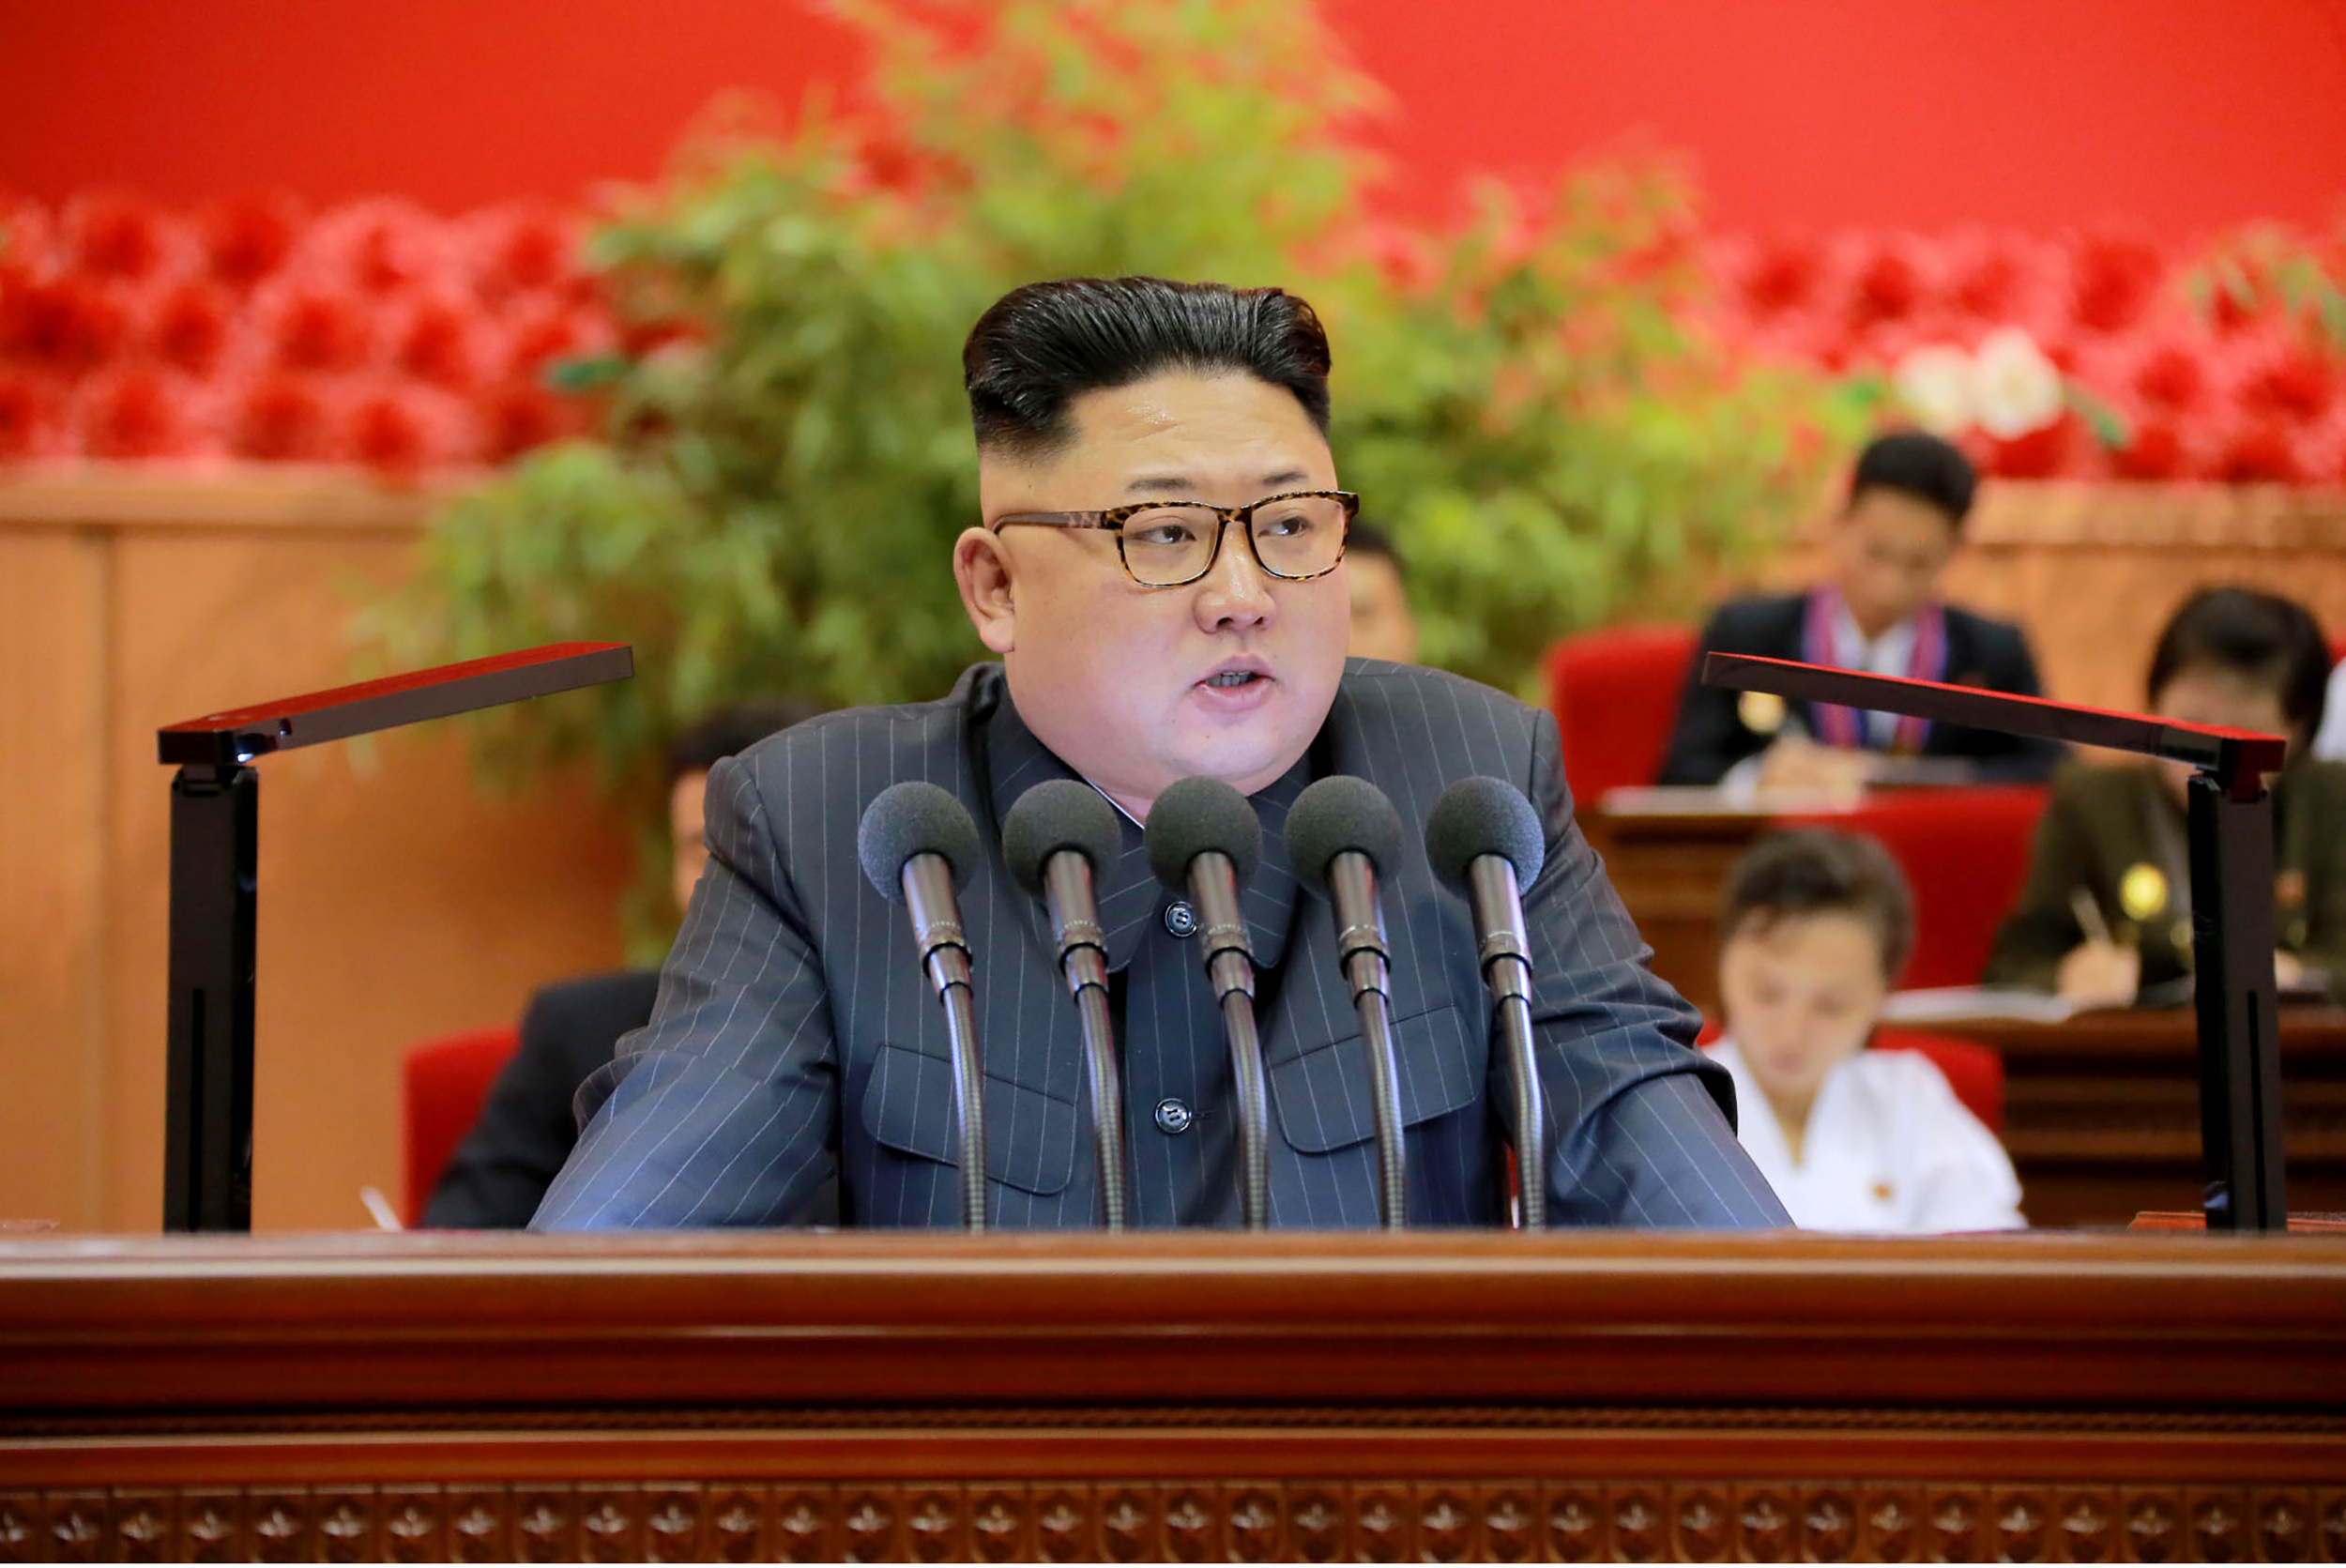 This recent picture released by North Korea's official Korean Central News Agency (KCNA) on August 29, 2016 shows North Korean leader Kim Jong-Un dellivering his speech during the 9th Congress of the Kim Il-Sung Socialist Youth League which held in Pyongyang on August 27 and 28, 2016. / AFP PHOTO / KCNA / KNS